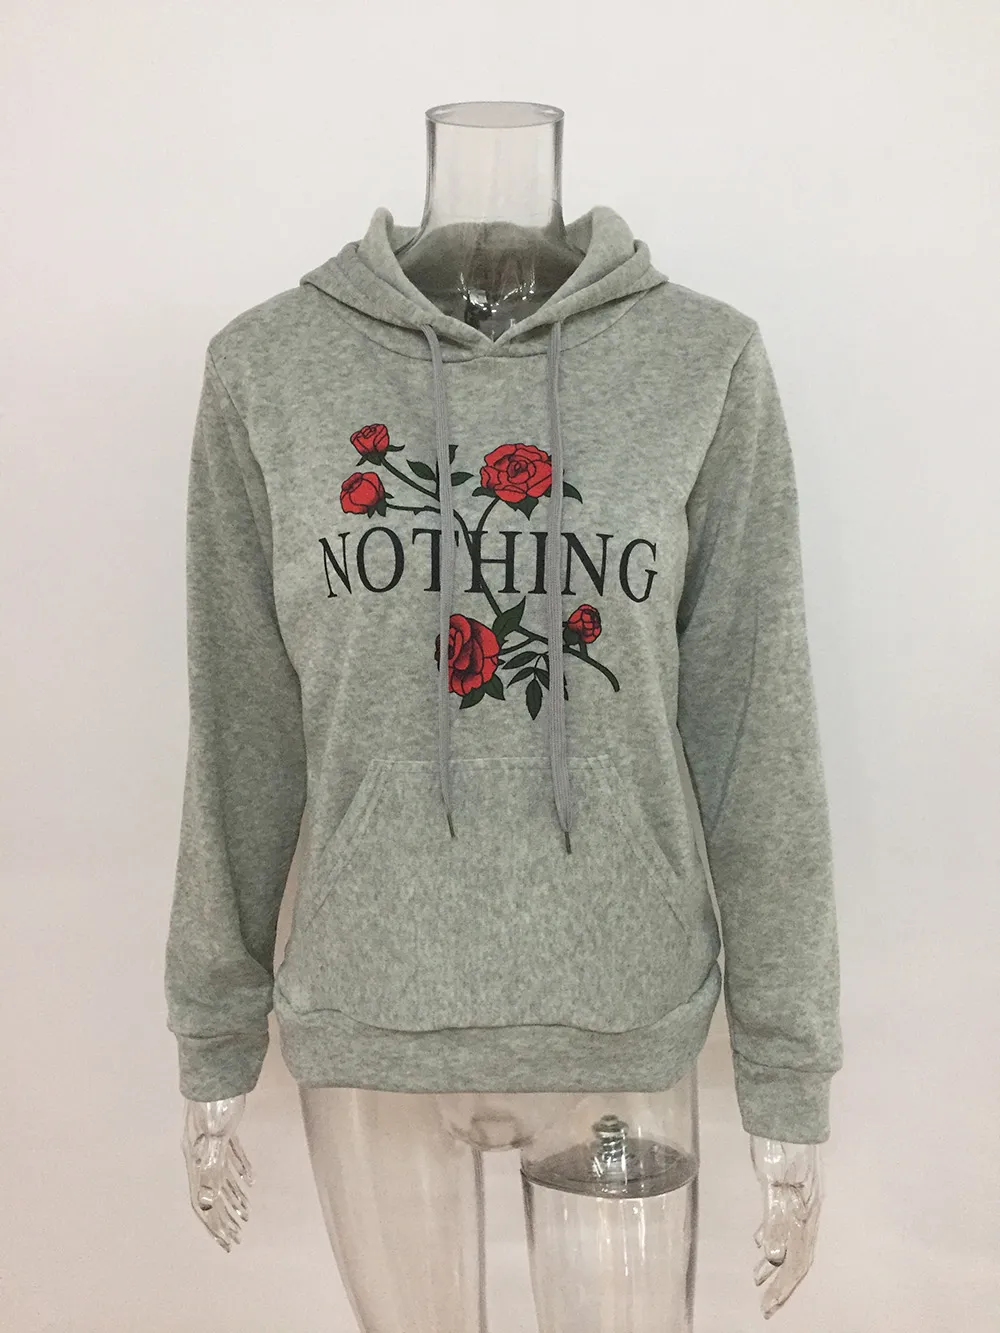 Women's Hoodies Sweatshirts NOTHING Printed Rose Flower Embroidery Long Sleeve White Gray Size S M L XL Hooded Jacket Coat Femmes